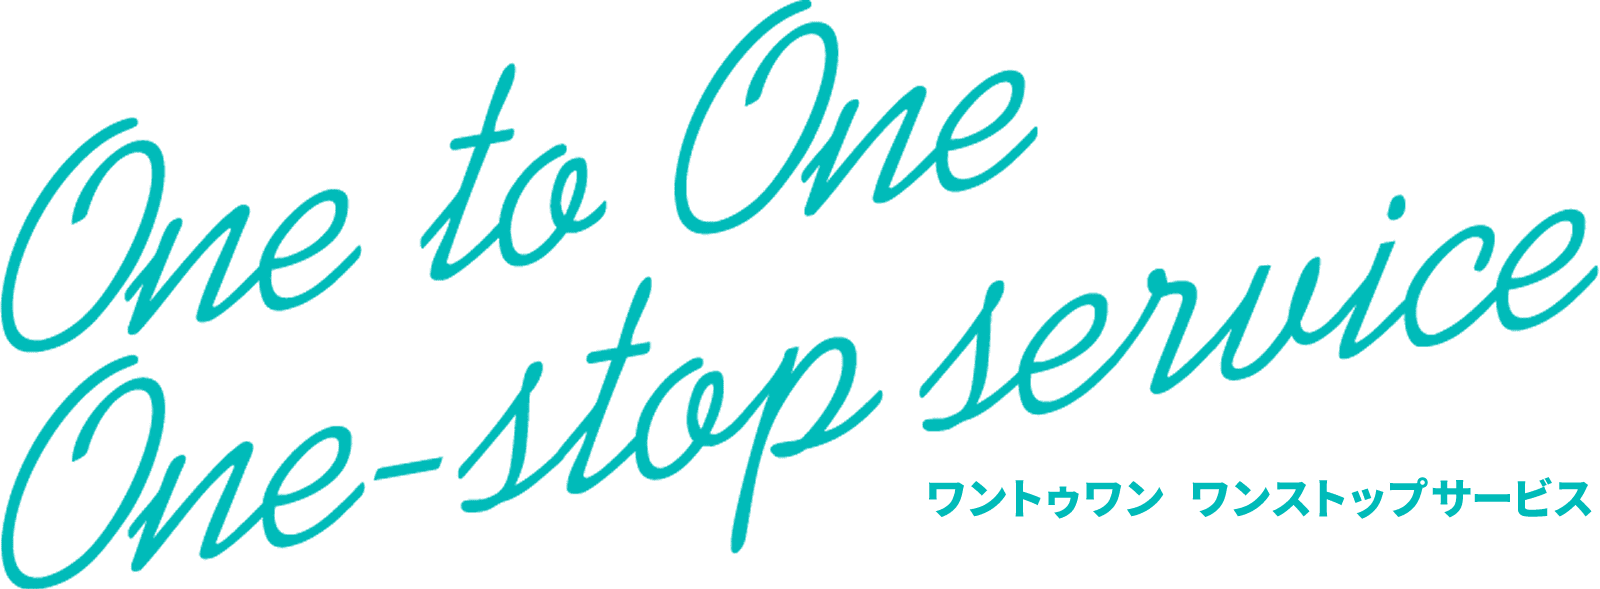 One to One One-stop service